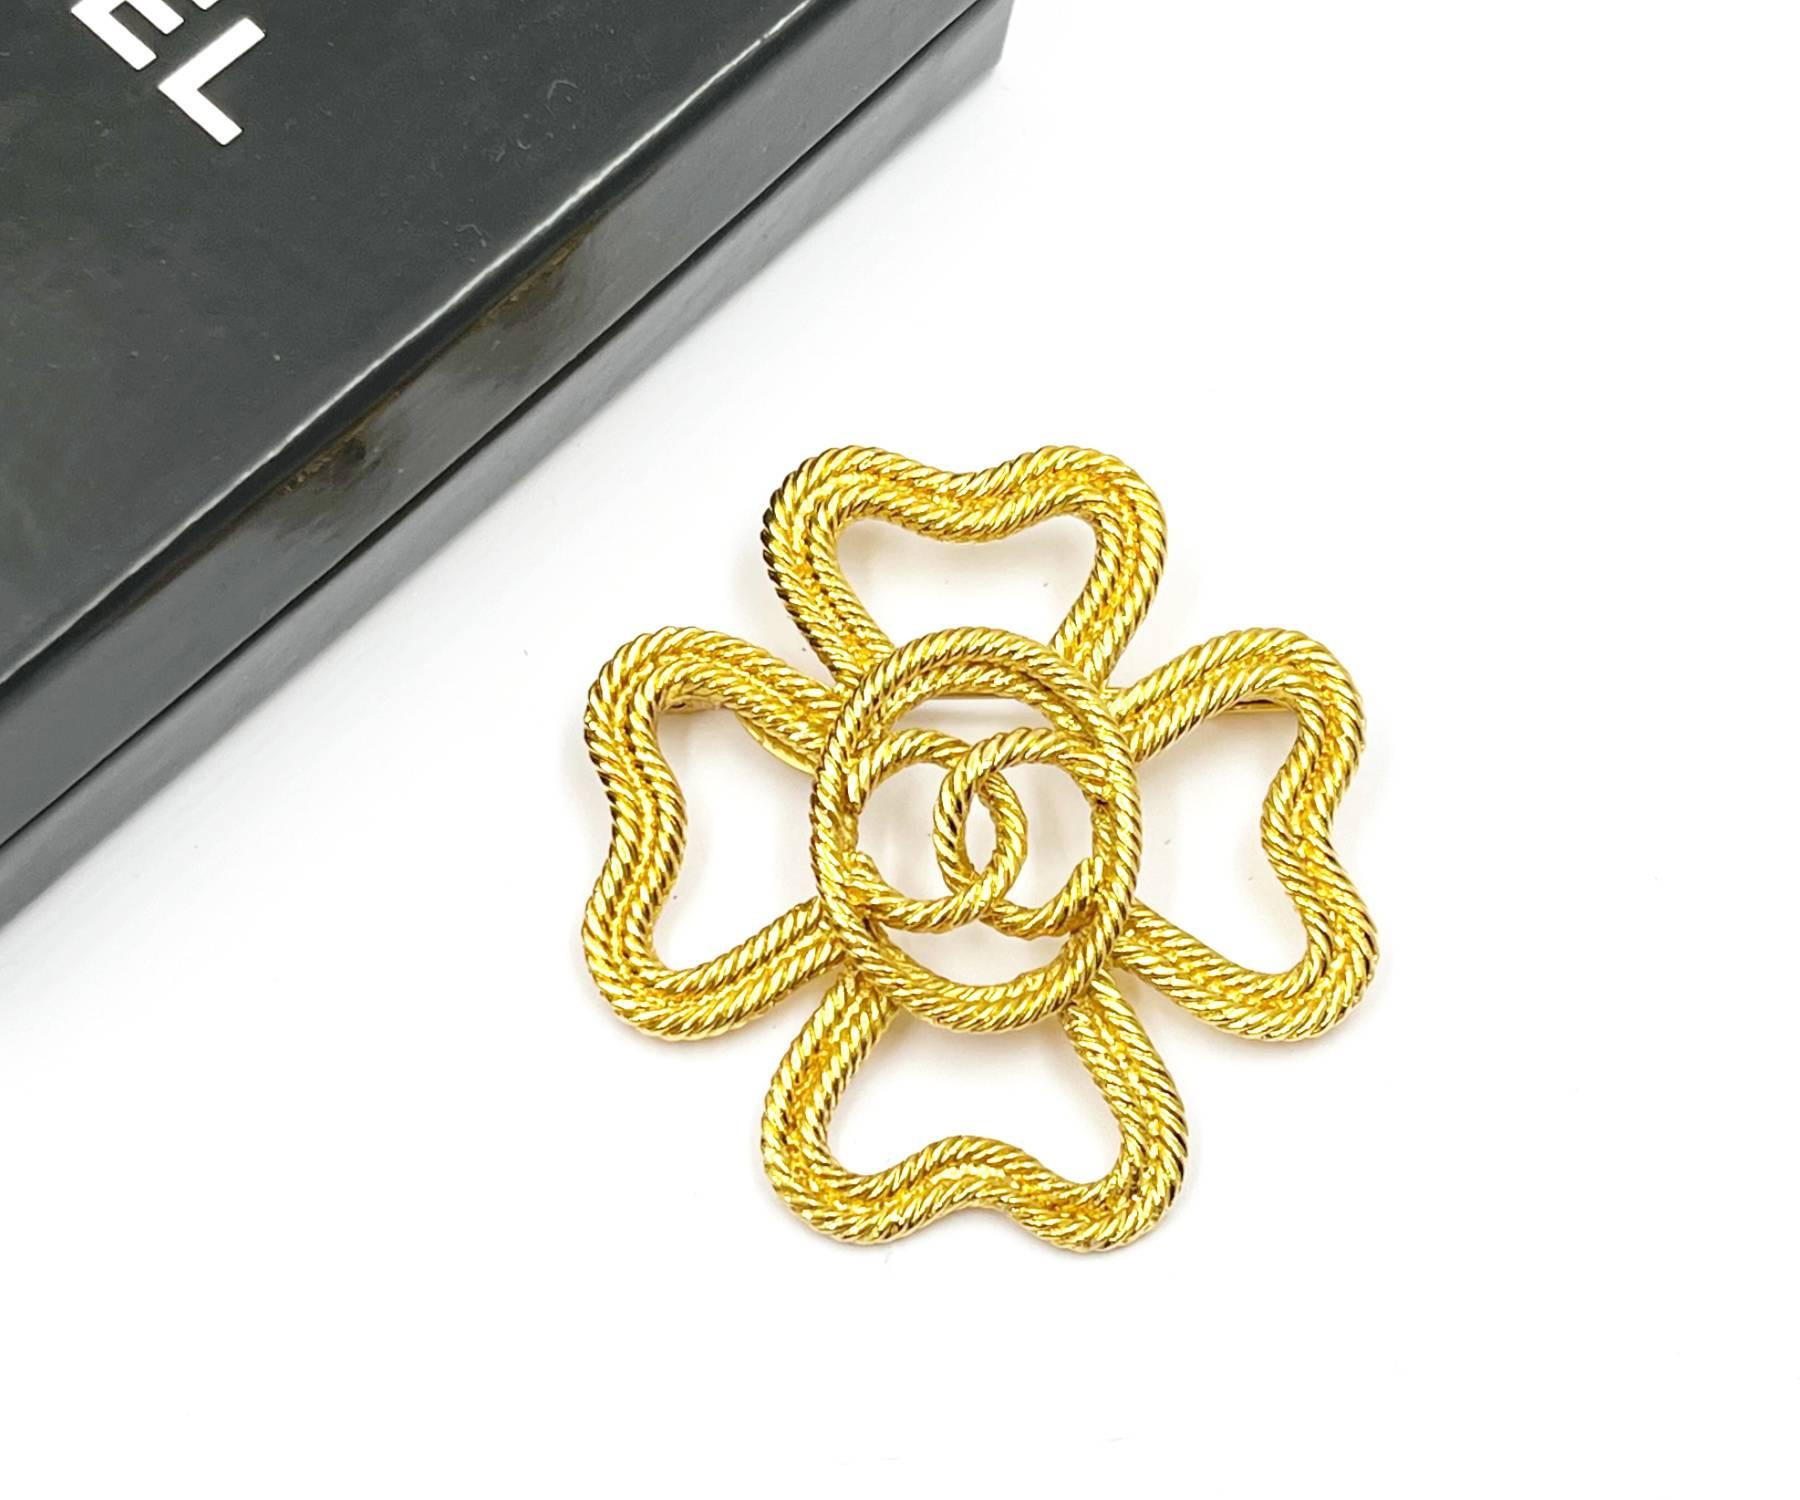 Chanel Vintage Gold Plated Rope Cross CC Brooch

*Marked 28
*Made in France
*Comes with the original box

– It is approximately 2.1″ x 2.25″.
-Very classic and pretty
-The pin’s gold plated is fainting.
-In an excellent vintage